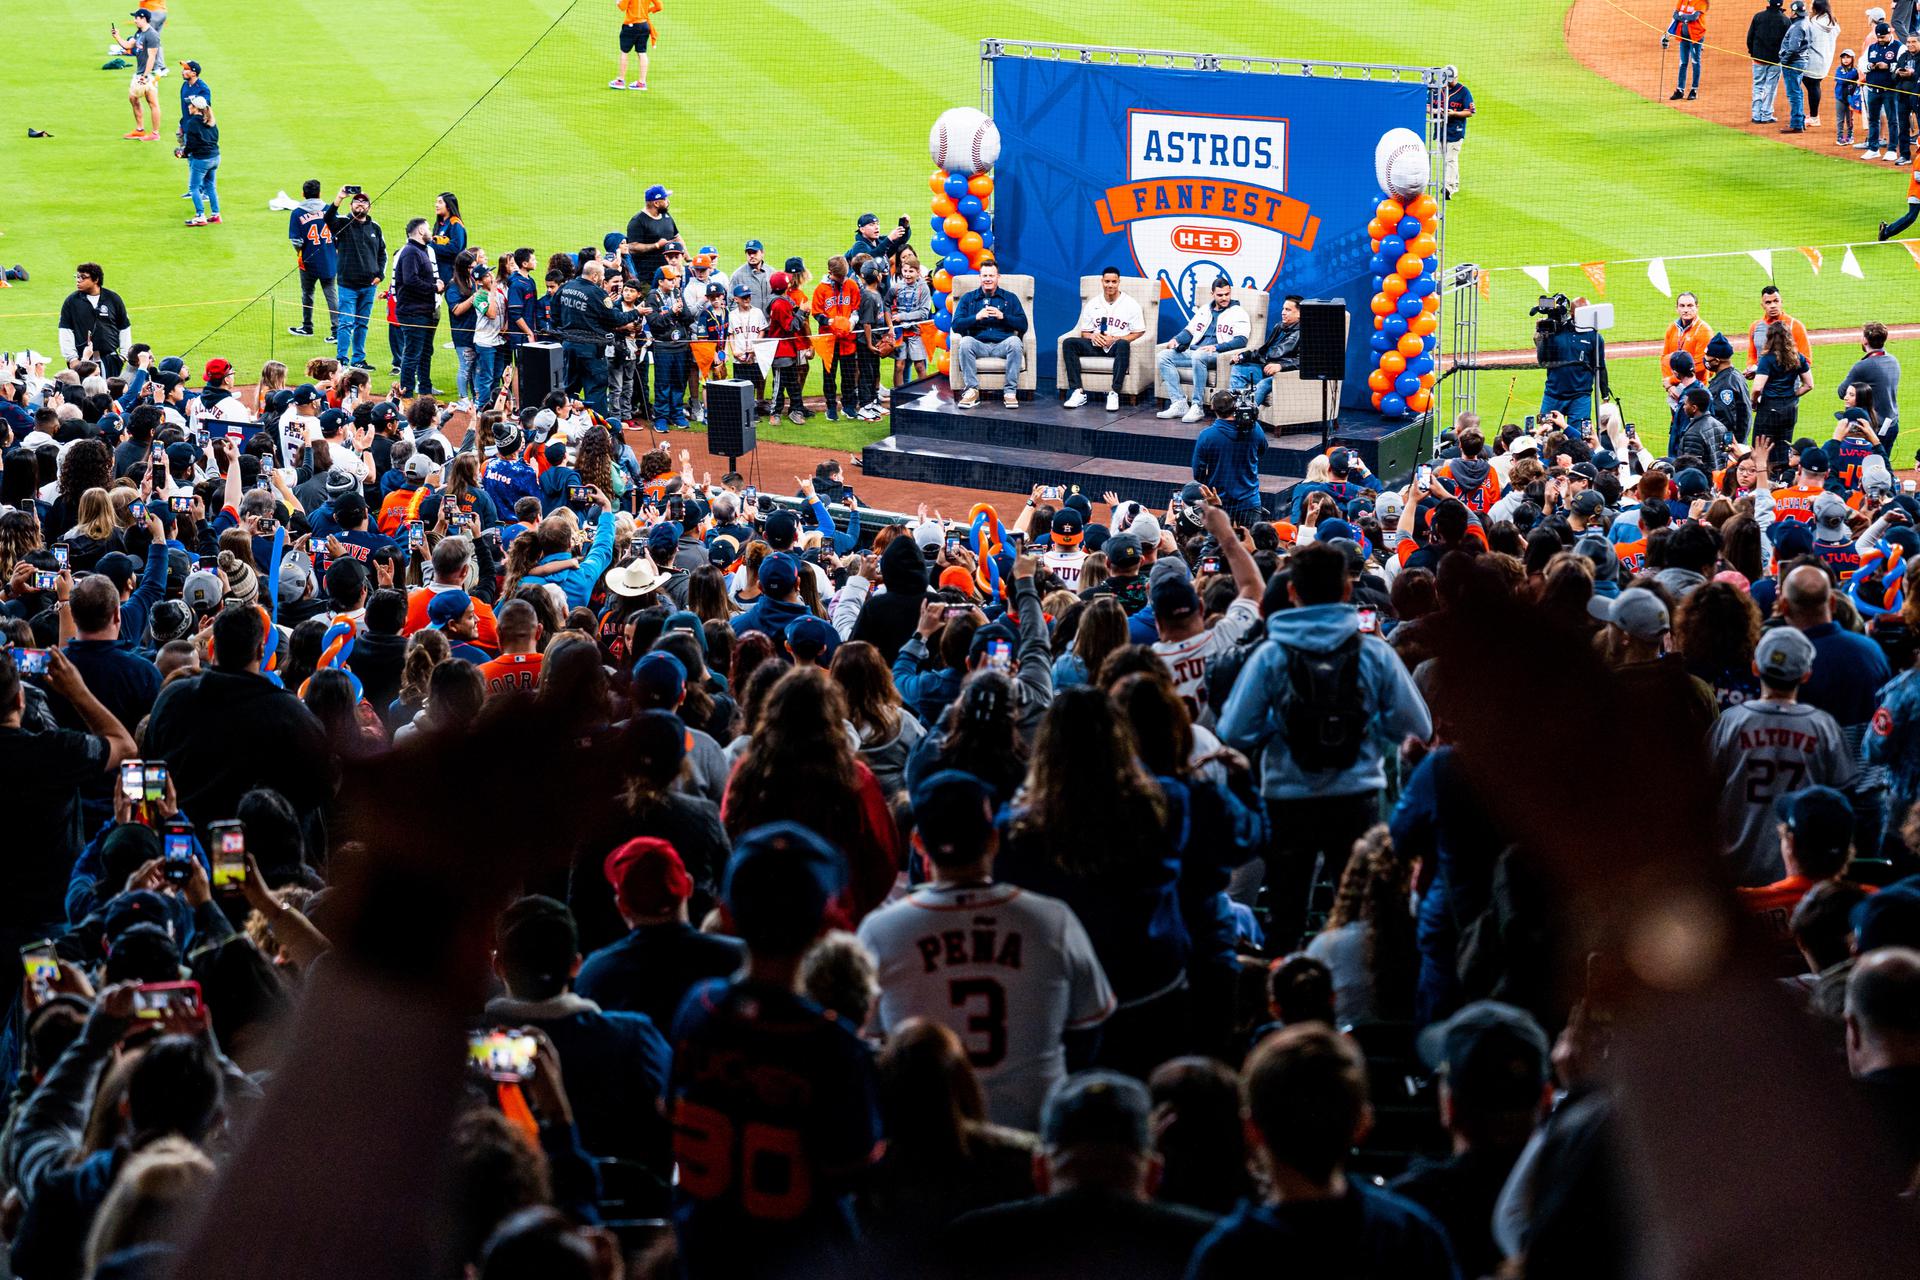 Astros FanFest at Minute Maid Park